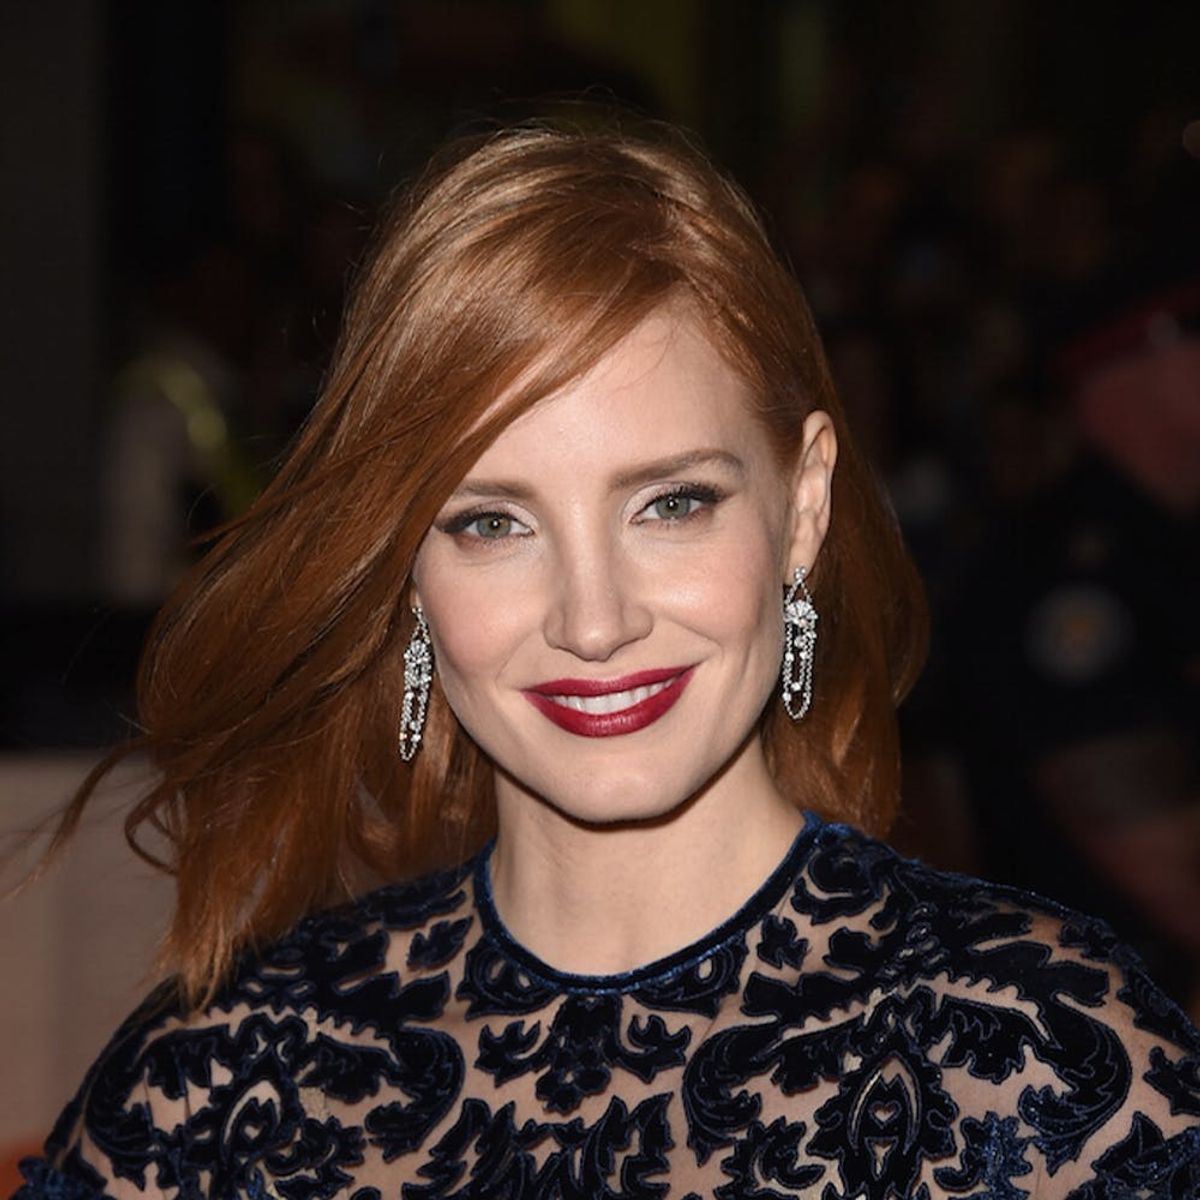 Jessica Chastain Reunited Her Grandmother With Her Stolen Dog Thanks to the Internet